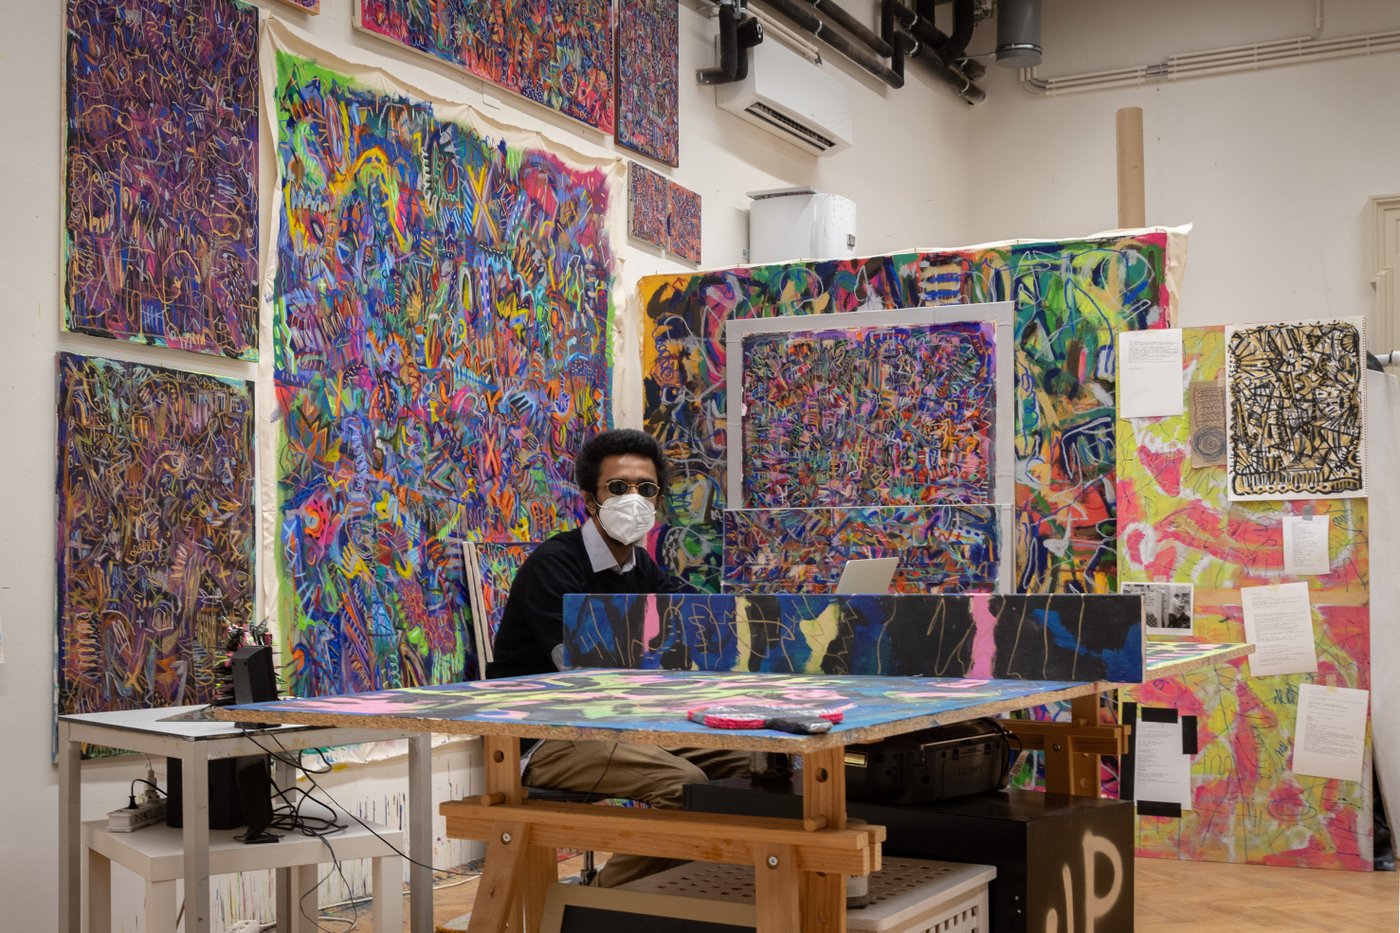 The artist sits behind his work table with mask and sunglasses. He is surrounded by his works, a multitude of small-scale, colorful and abstract paintings and drawings.